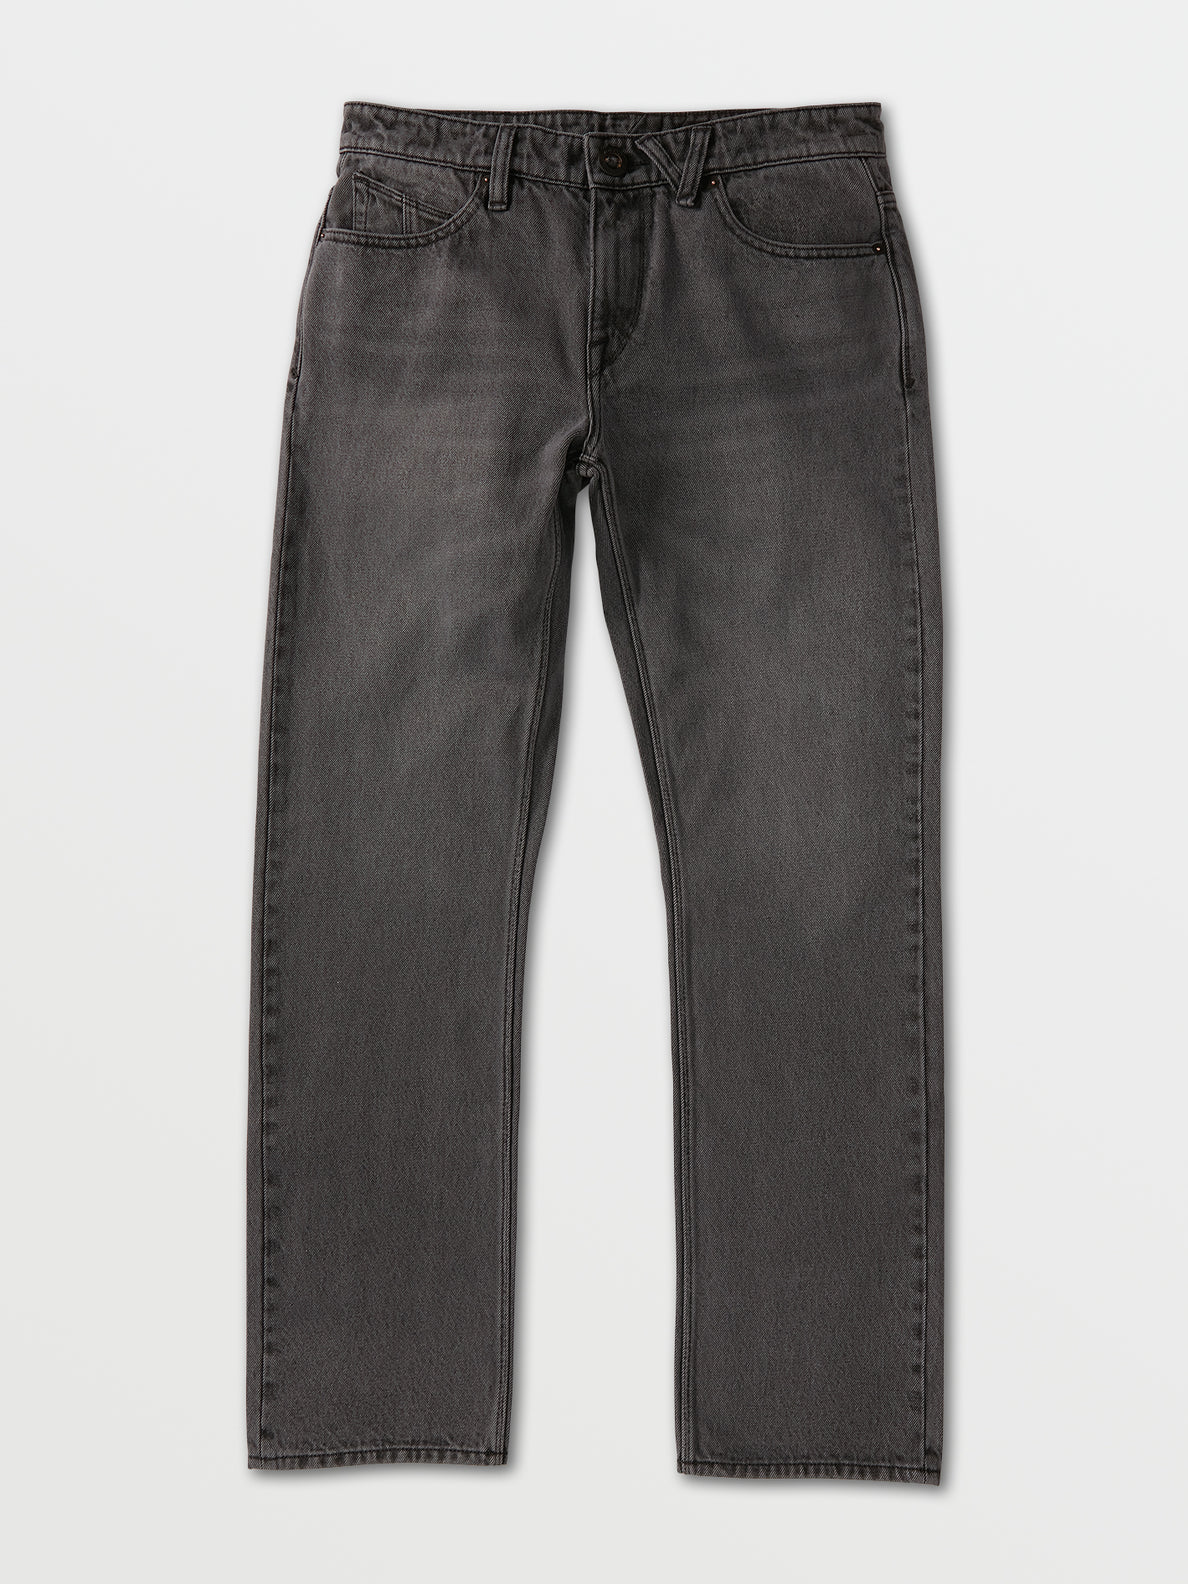 Solver Modern Fit Jeans - Fade To Black (A1931503_FTB) [F]